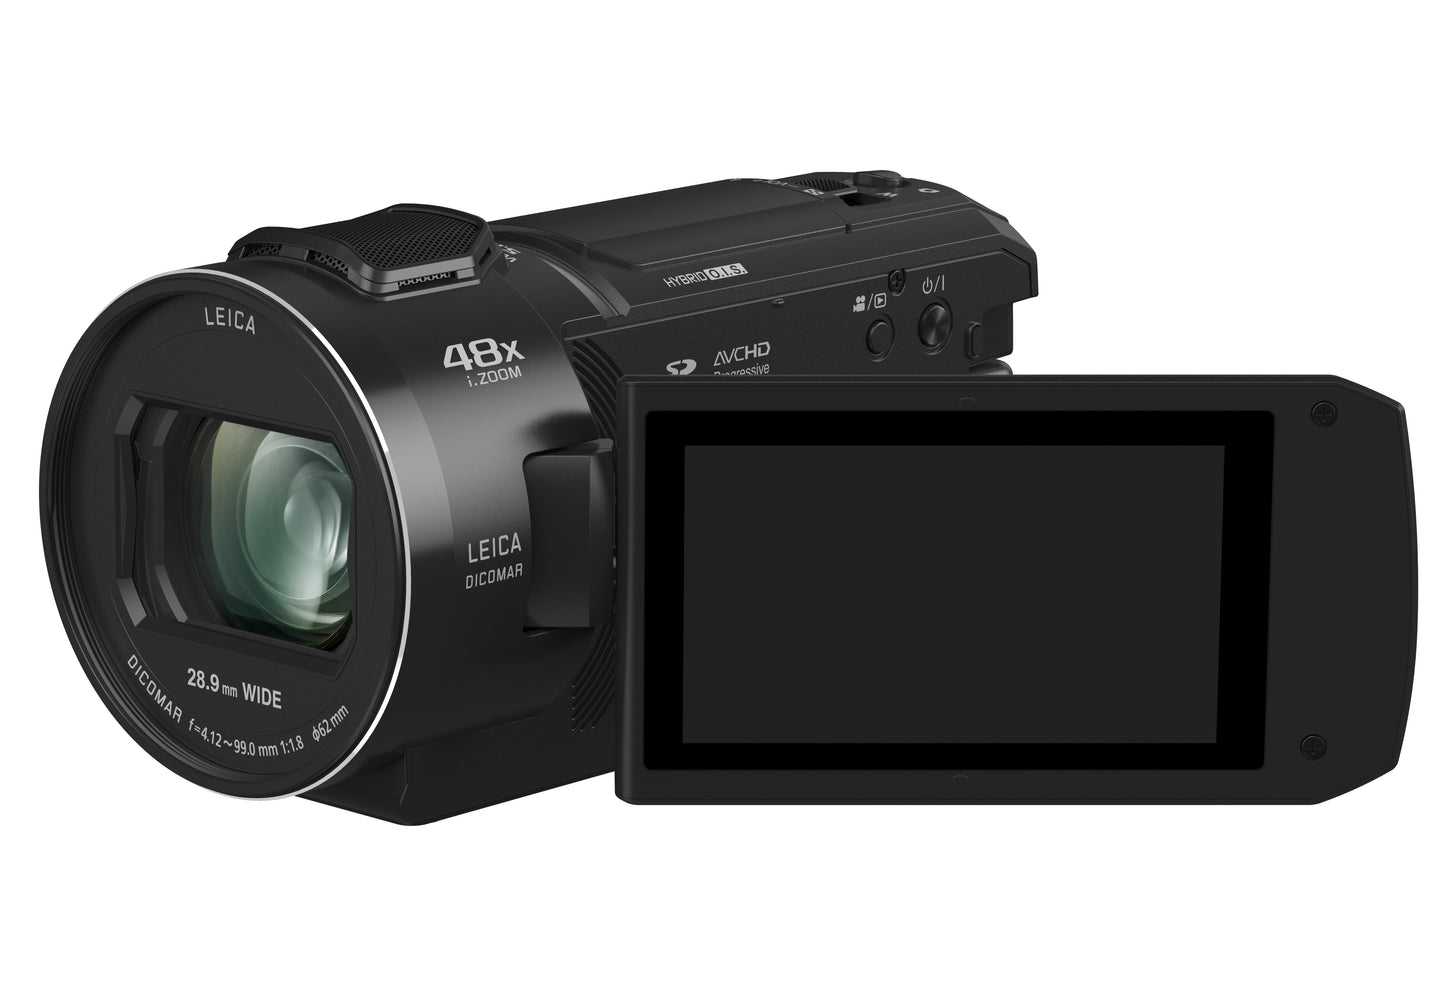 Panasonic HC-V800 Full HD Camcorder with 24x Optical Zoom, 3" LCD, WiFi & SD/SDHC/SDXC Compatibility - Black